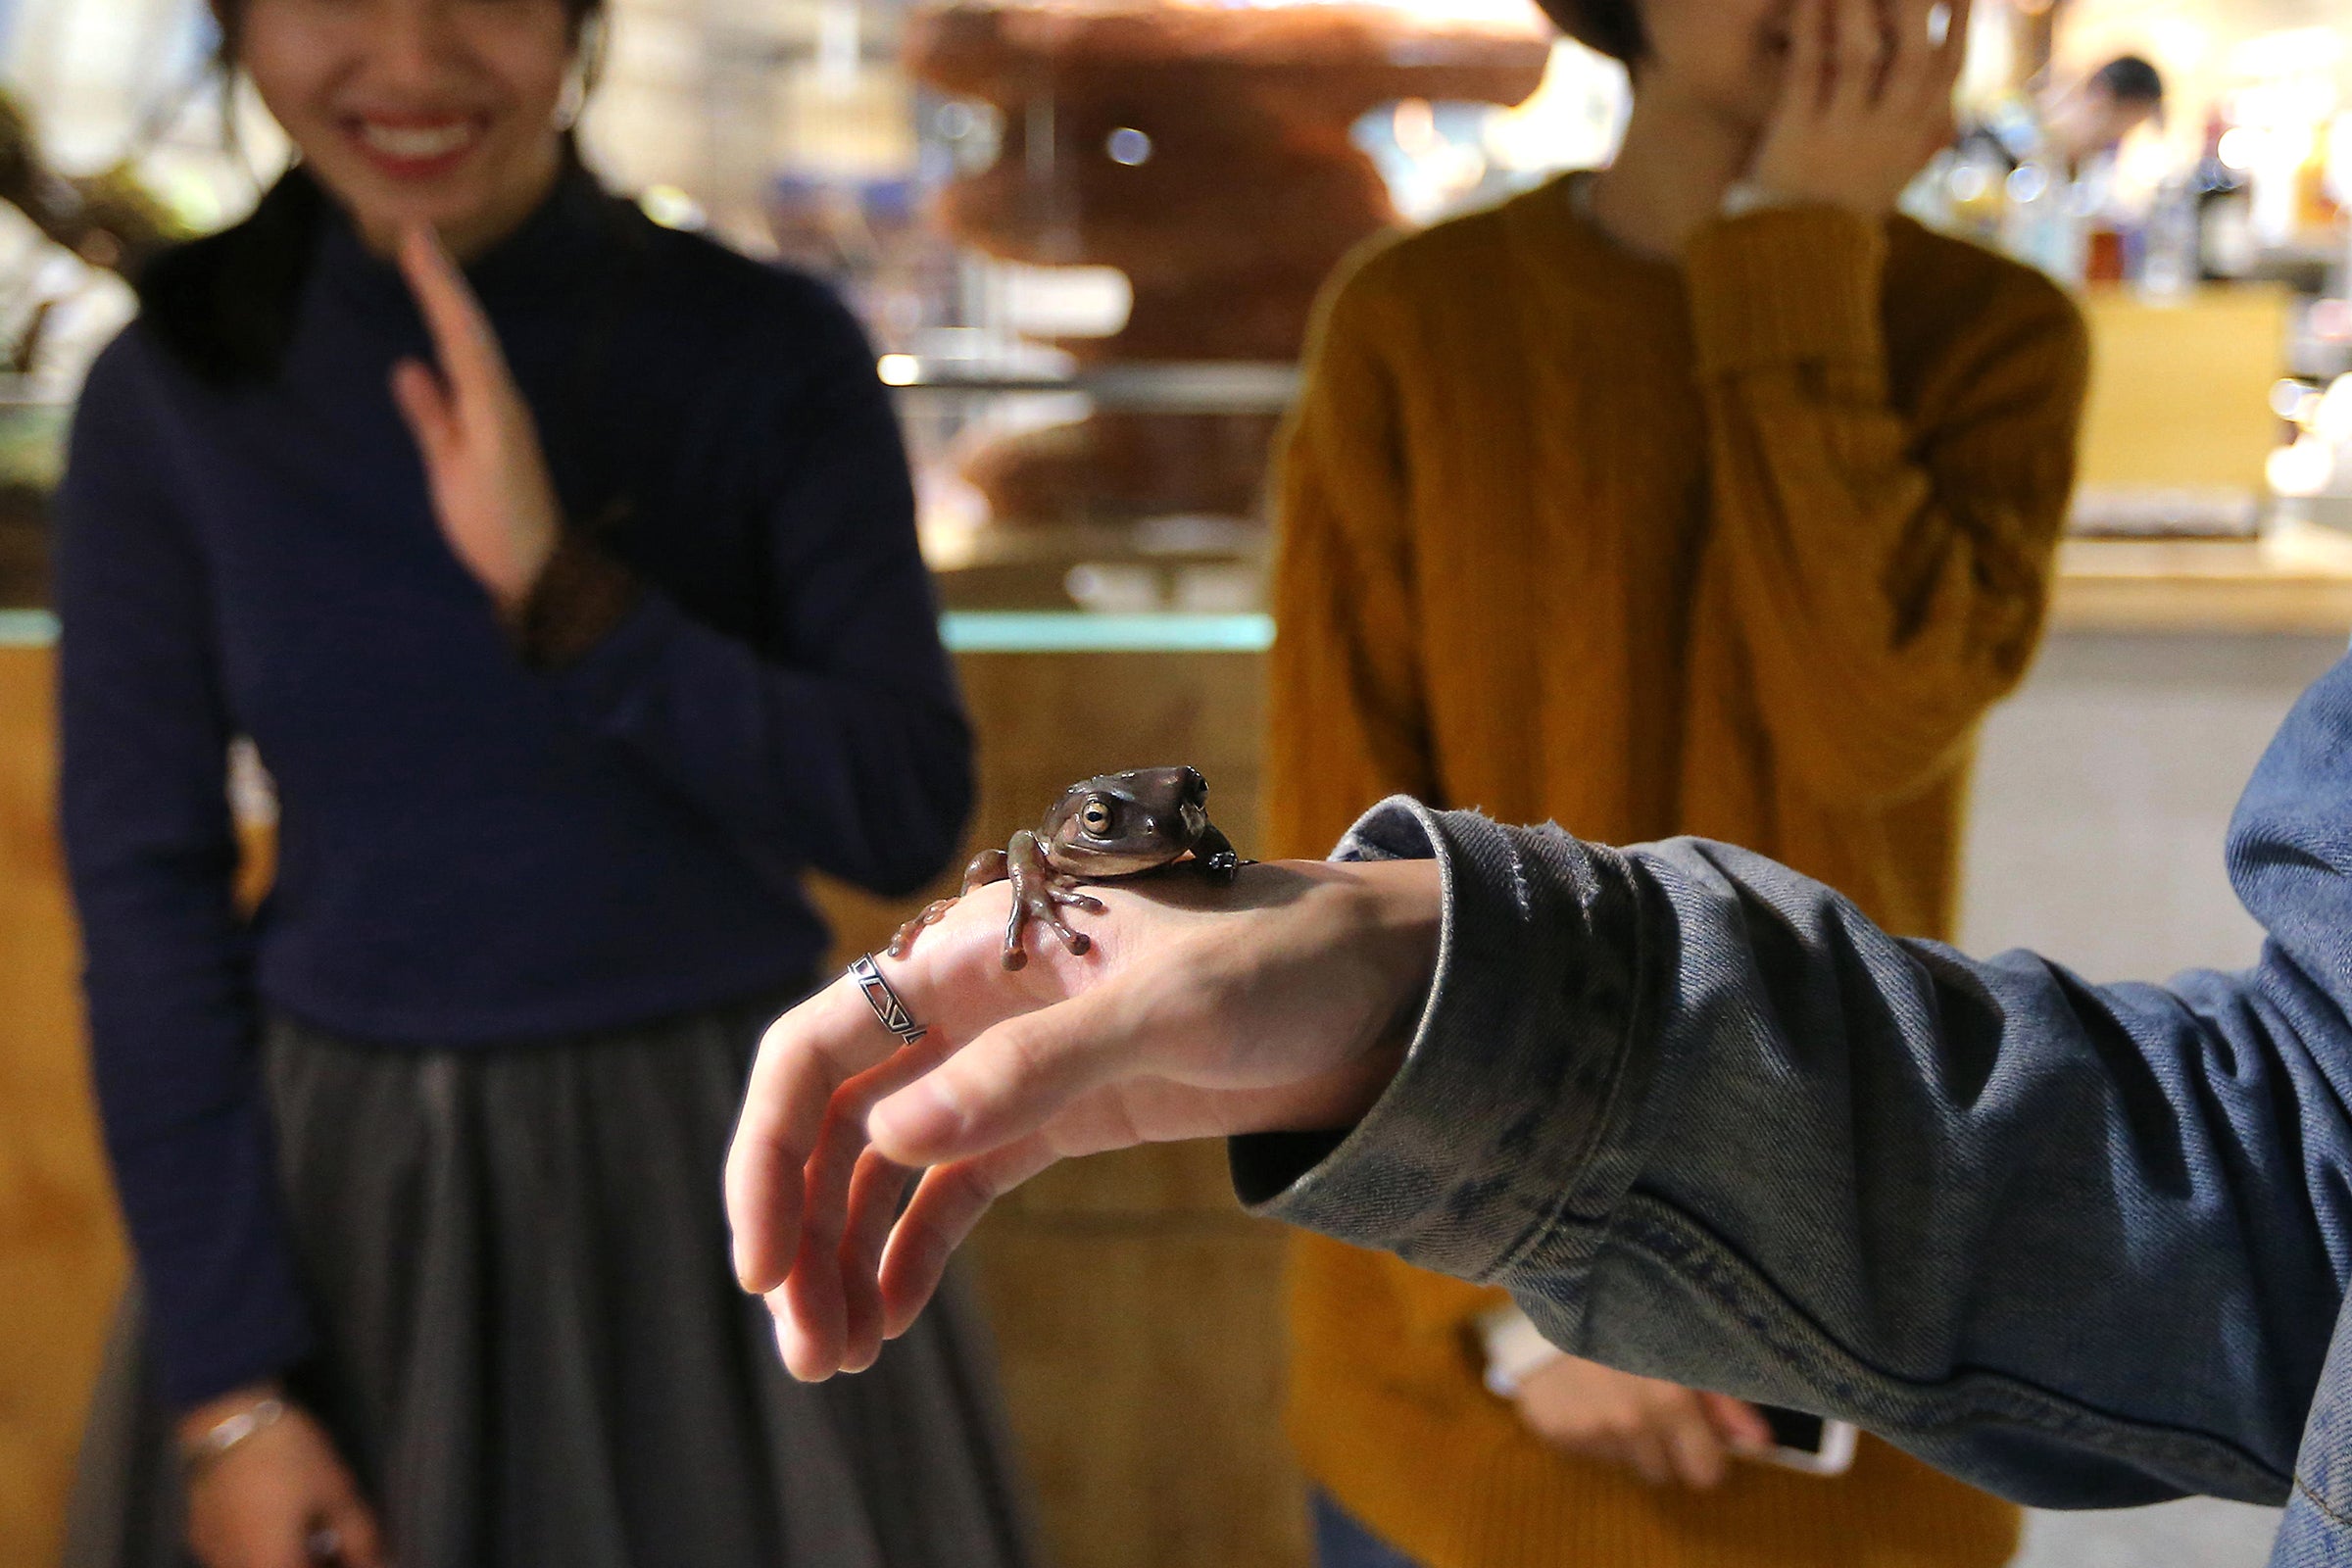 A person holds a tree frog in a reptile-themed pet cafe in China